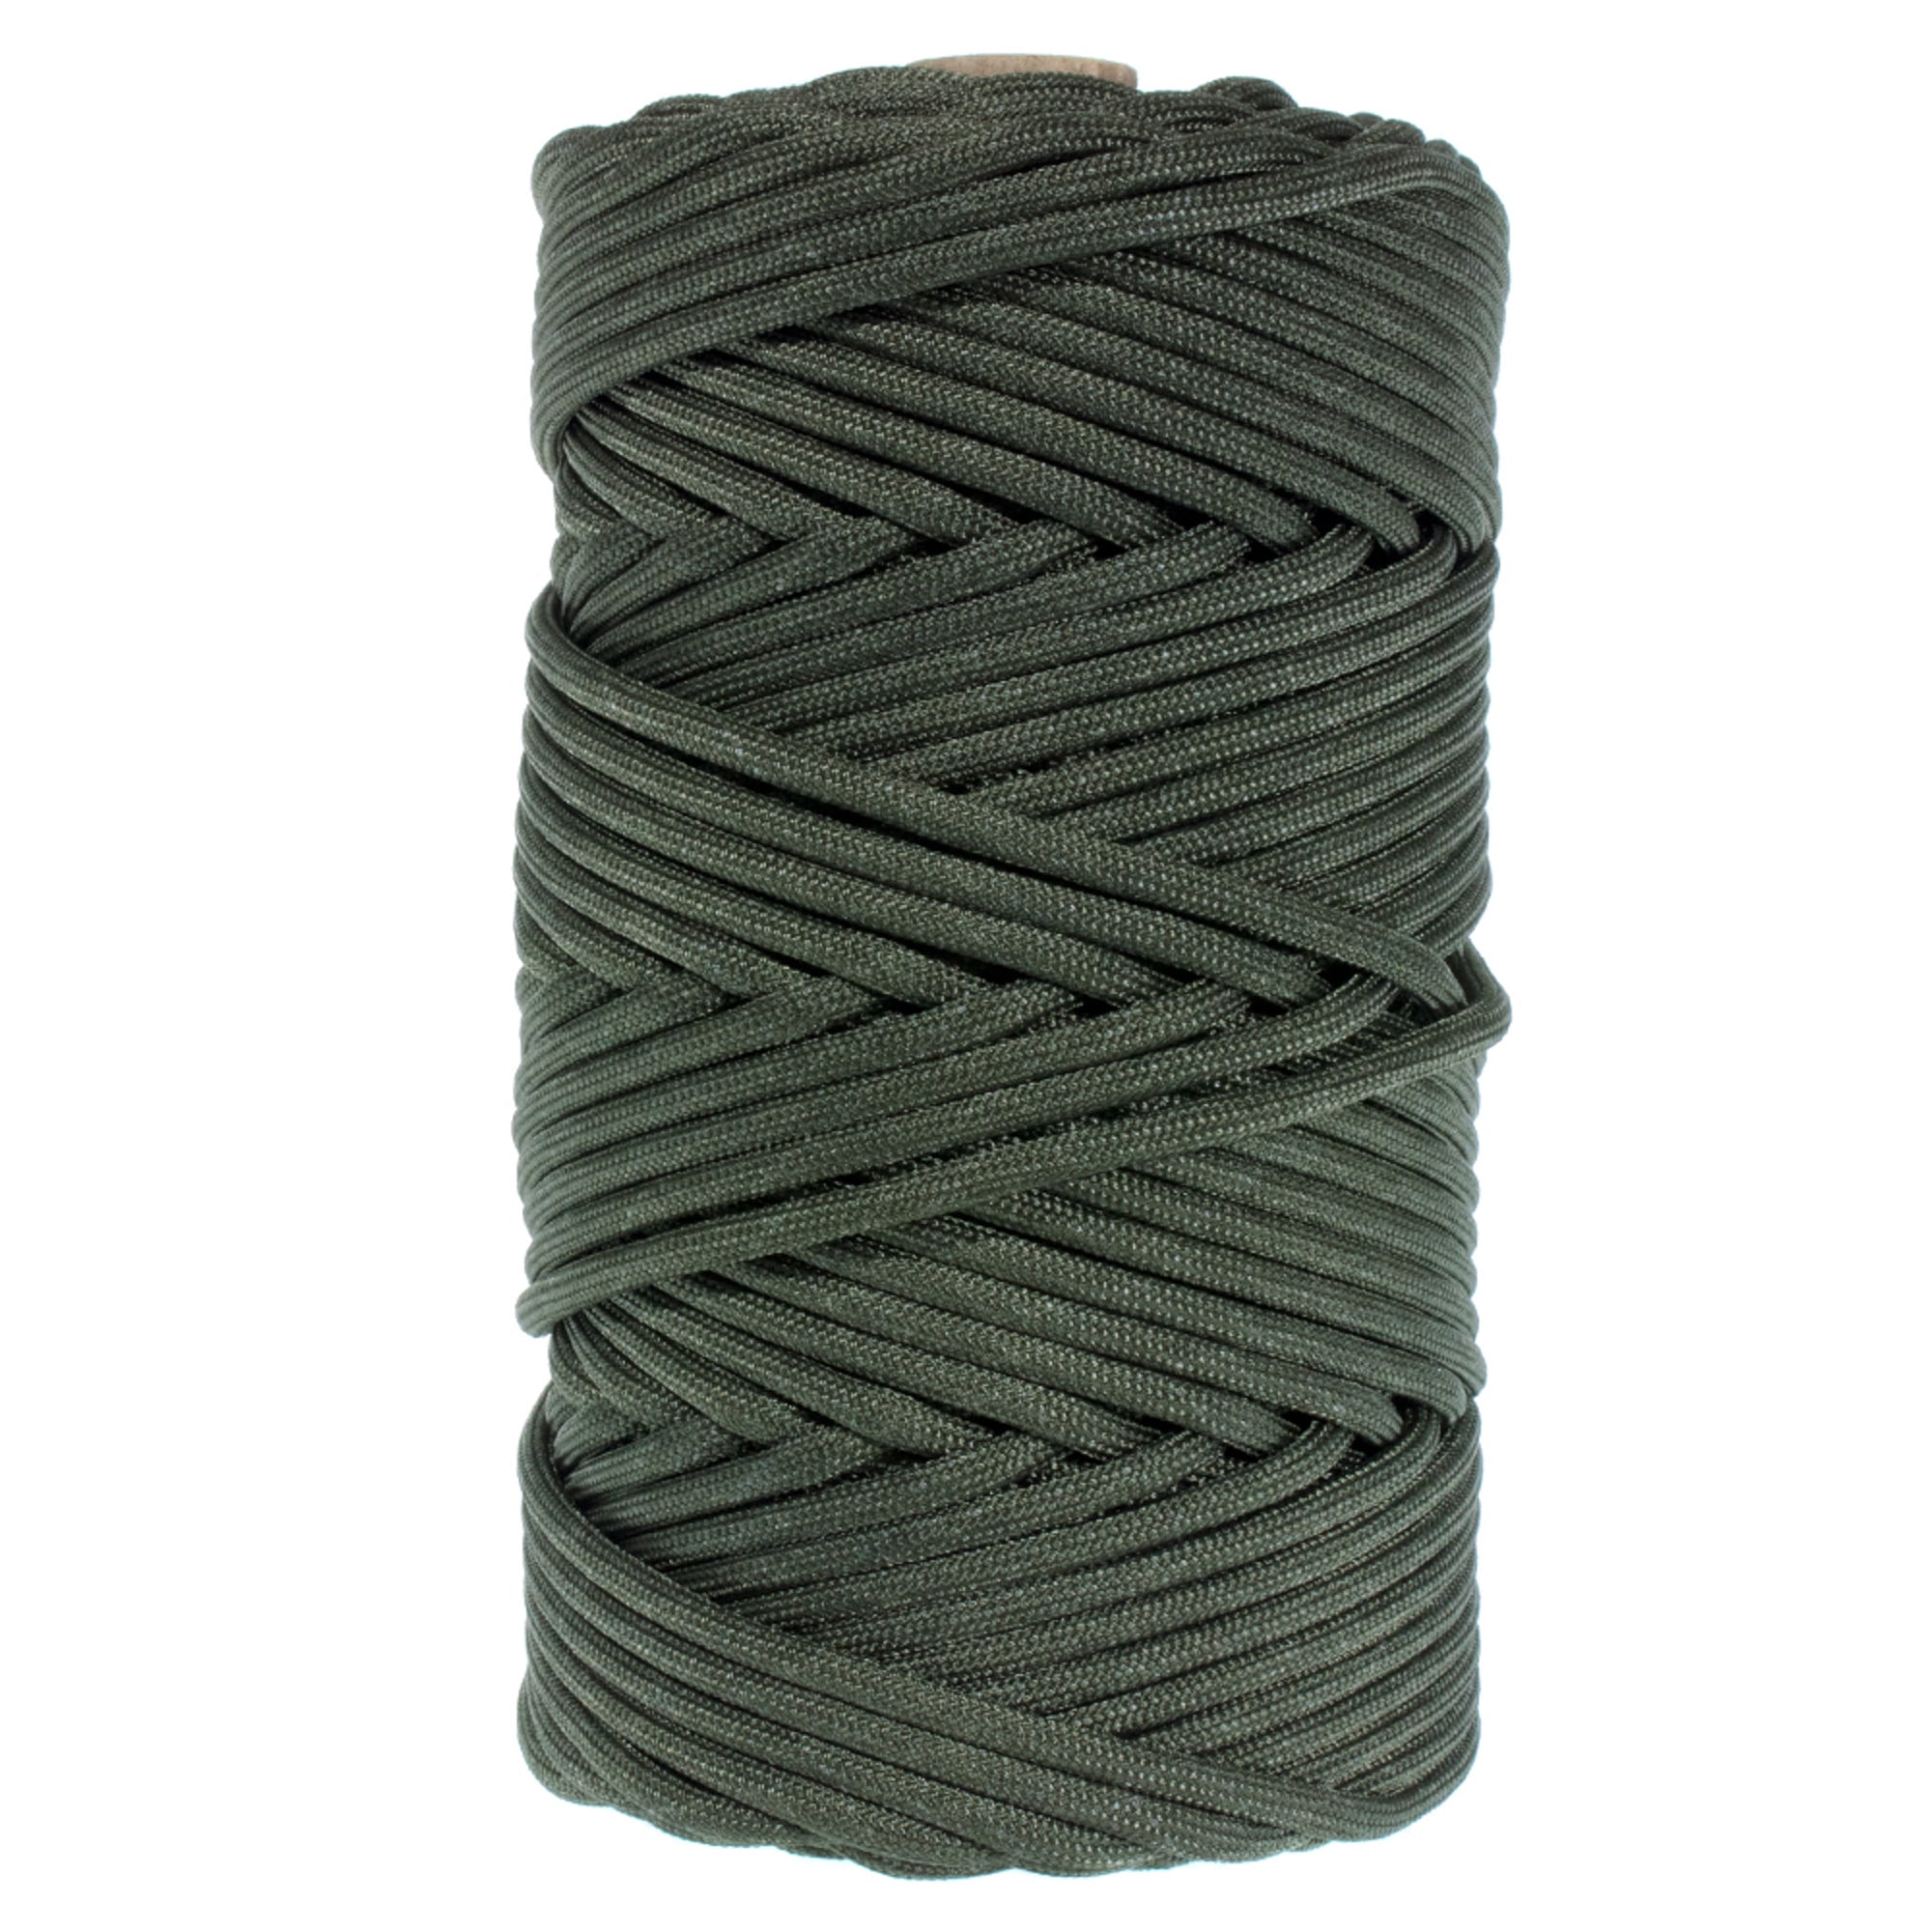 100% Nylon Made in USA Golberg Military Survival Rope Cord 550 lb Type III 7 Strand 5/32 Parachute Rope MIL-SPEC-C-5040-H Authentic Mil-Spec 550 Paracord 